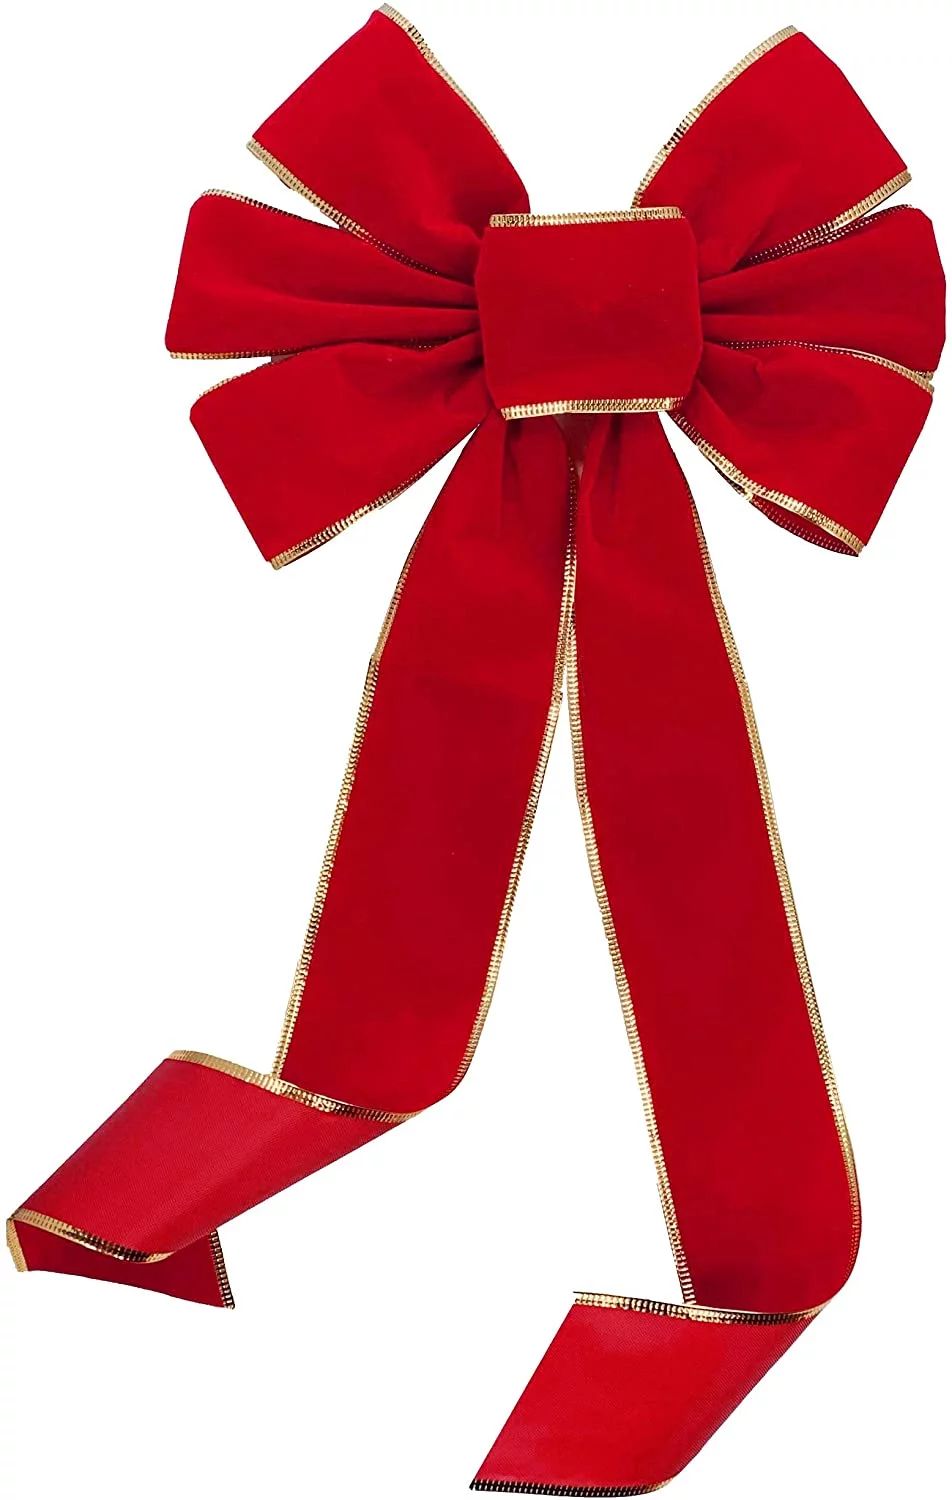 Red Velvet Gold Edge Bow - 10" Wide, 18" Long Tails, Christmas Wreath Bow, Boxing Day, Fall Decor... | Walmart (US)